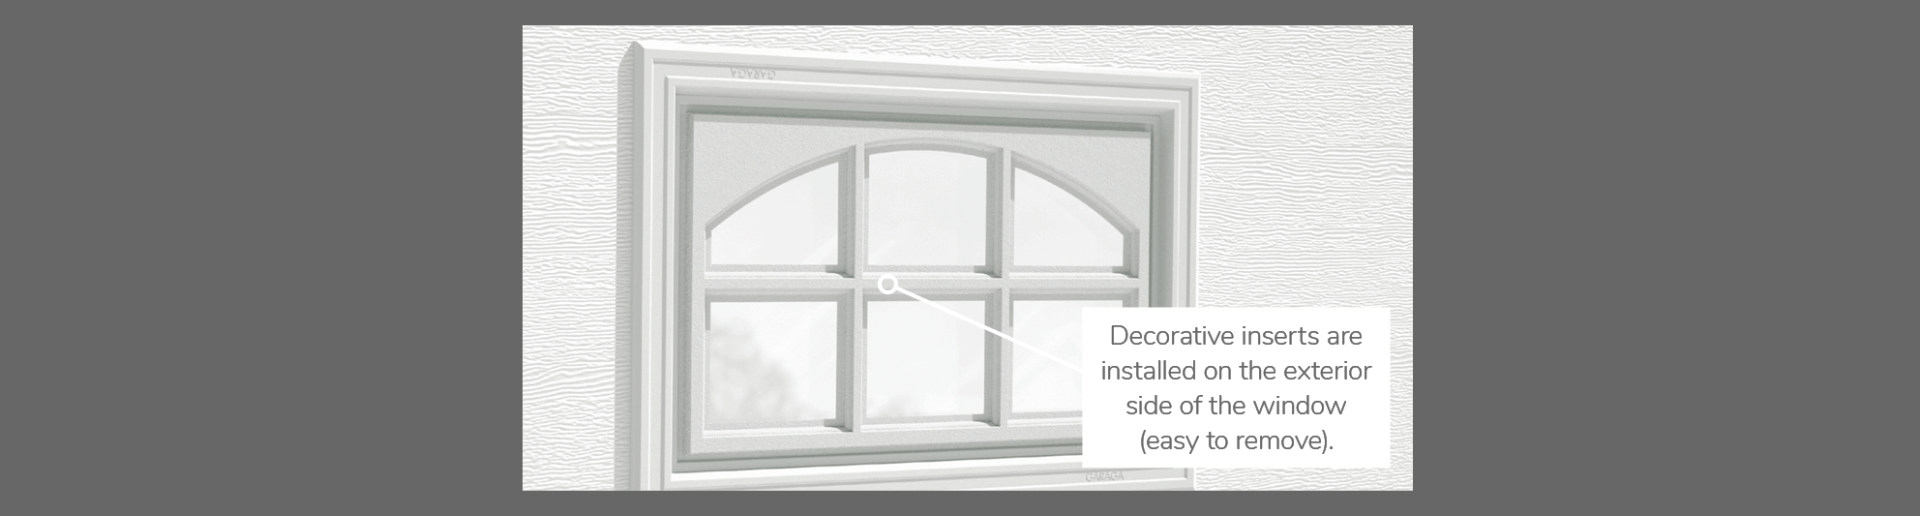 Cascade Decorative Insert, 20" x 13", available for door 3 layers - Polystyrene, 2 layers - Polystyrene and Non-insulated